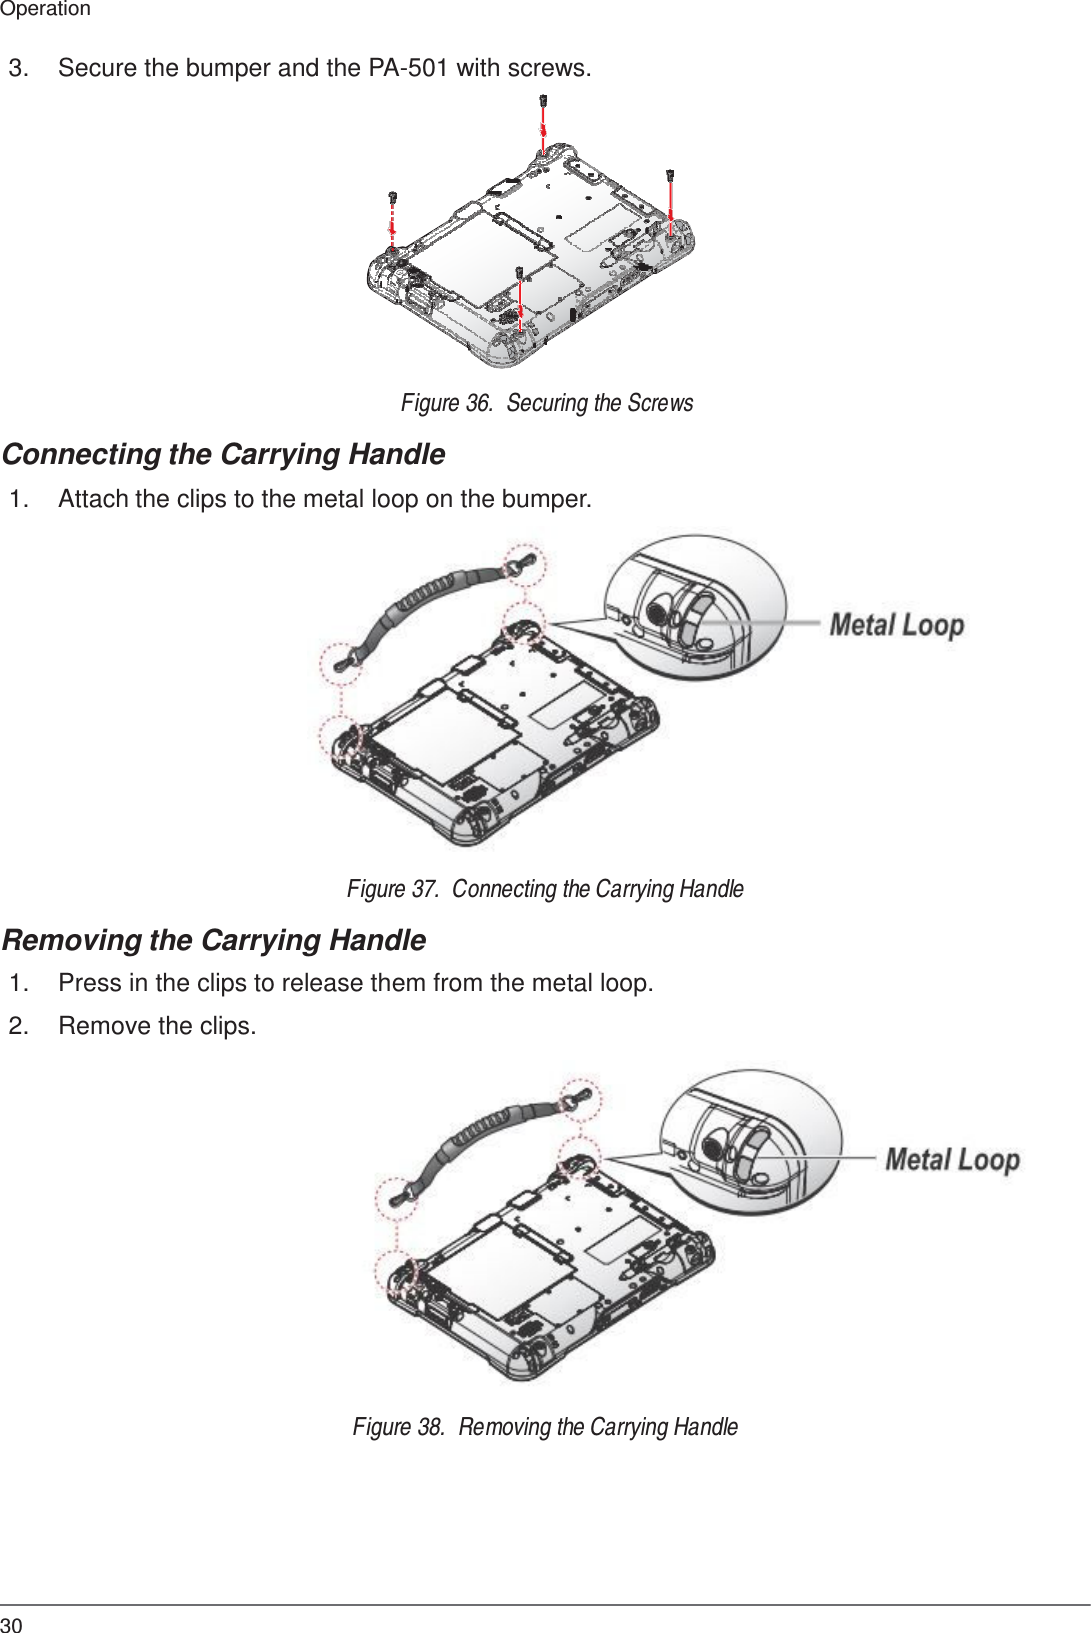 30 Operation    3.  Secure the bumper and the PA-501 with screws.                Figure 36.  Securing the Screws  Connecting the Carrying Handle  1.  Attach the clips to the metal loop on the bumper.                  Figure 37.  Connecting the Carrying Handle  Removing the Carrying Handle  1.  Press in the clips to release them from the metal loop.  2.  Remove the clips.                 Figure 38.  Removing the Carrying Handle 